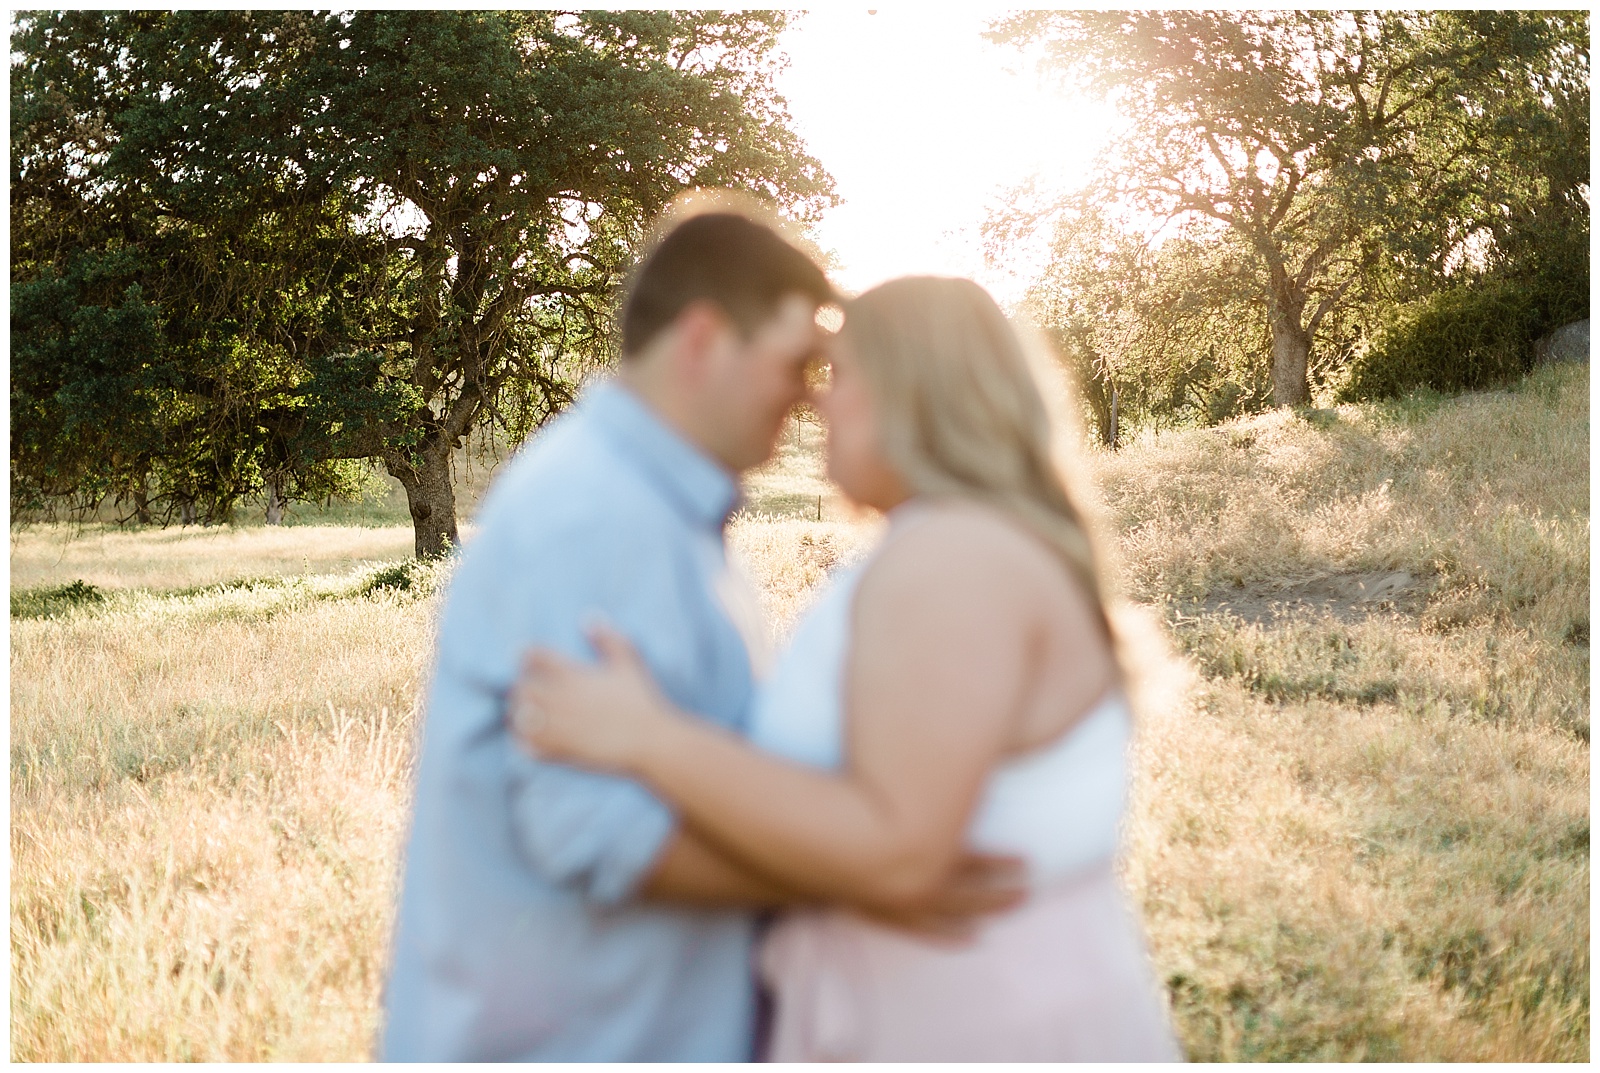 soft focus image of a newly engaged couple embracing 